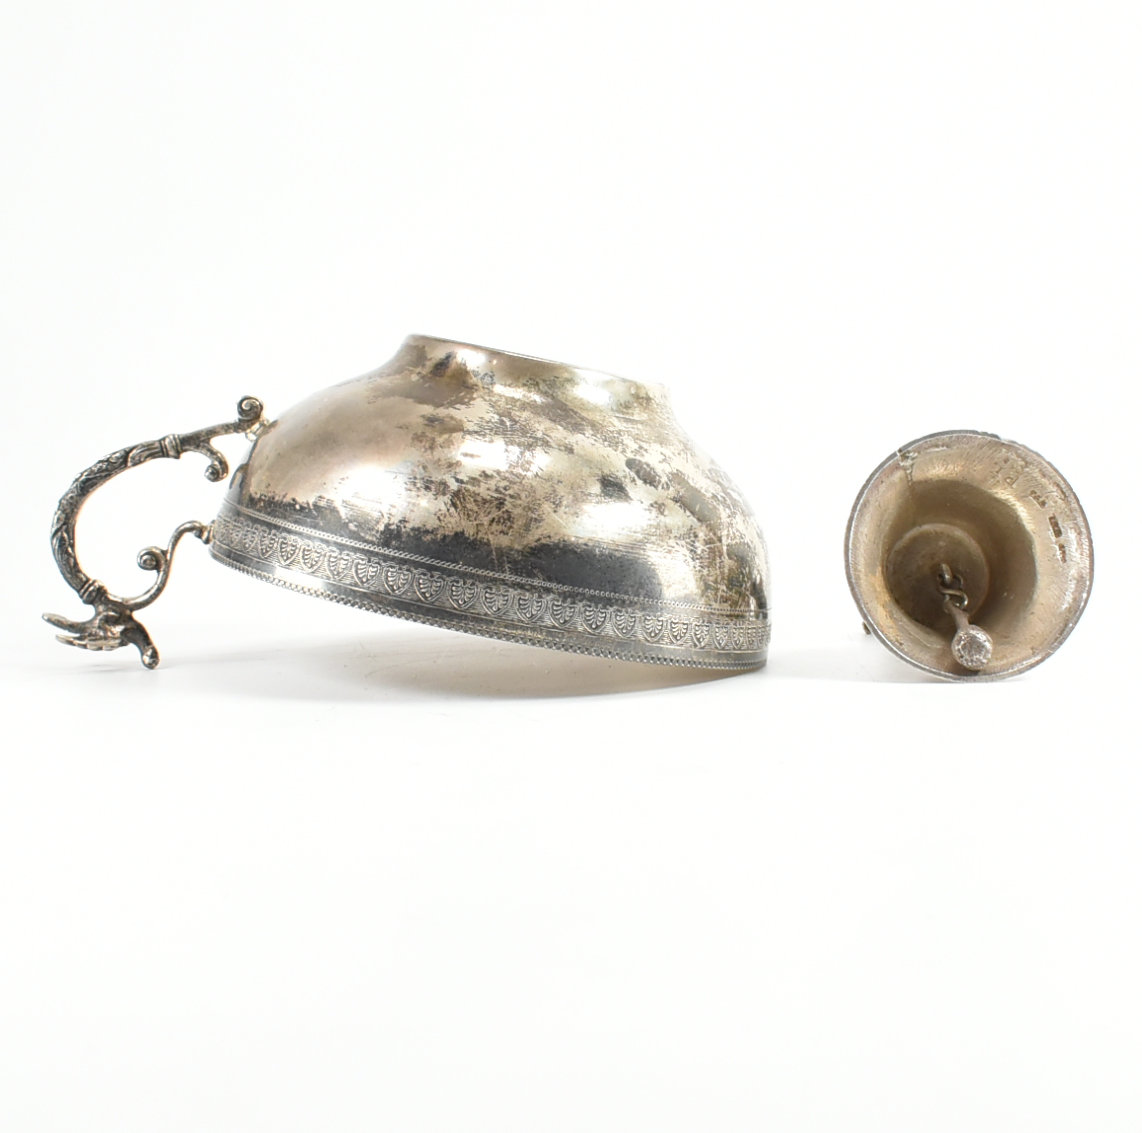 925 SILVER CUP BOWL & LAMA HANDLED BELL - Image 2 of 9